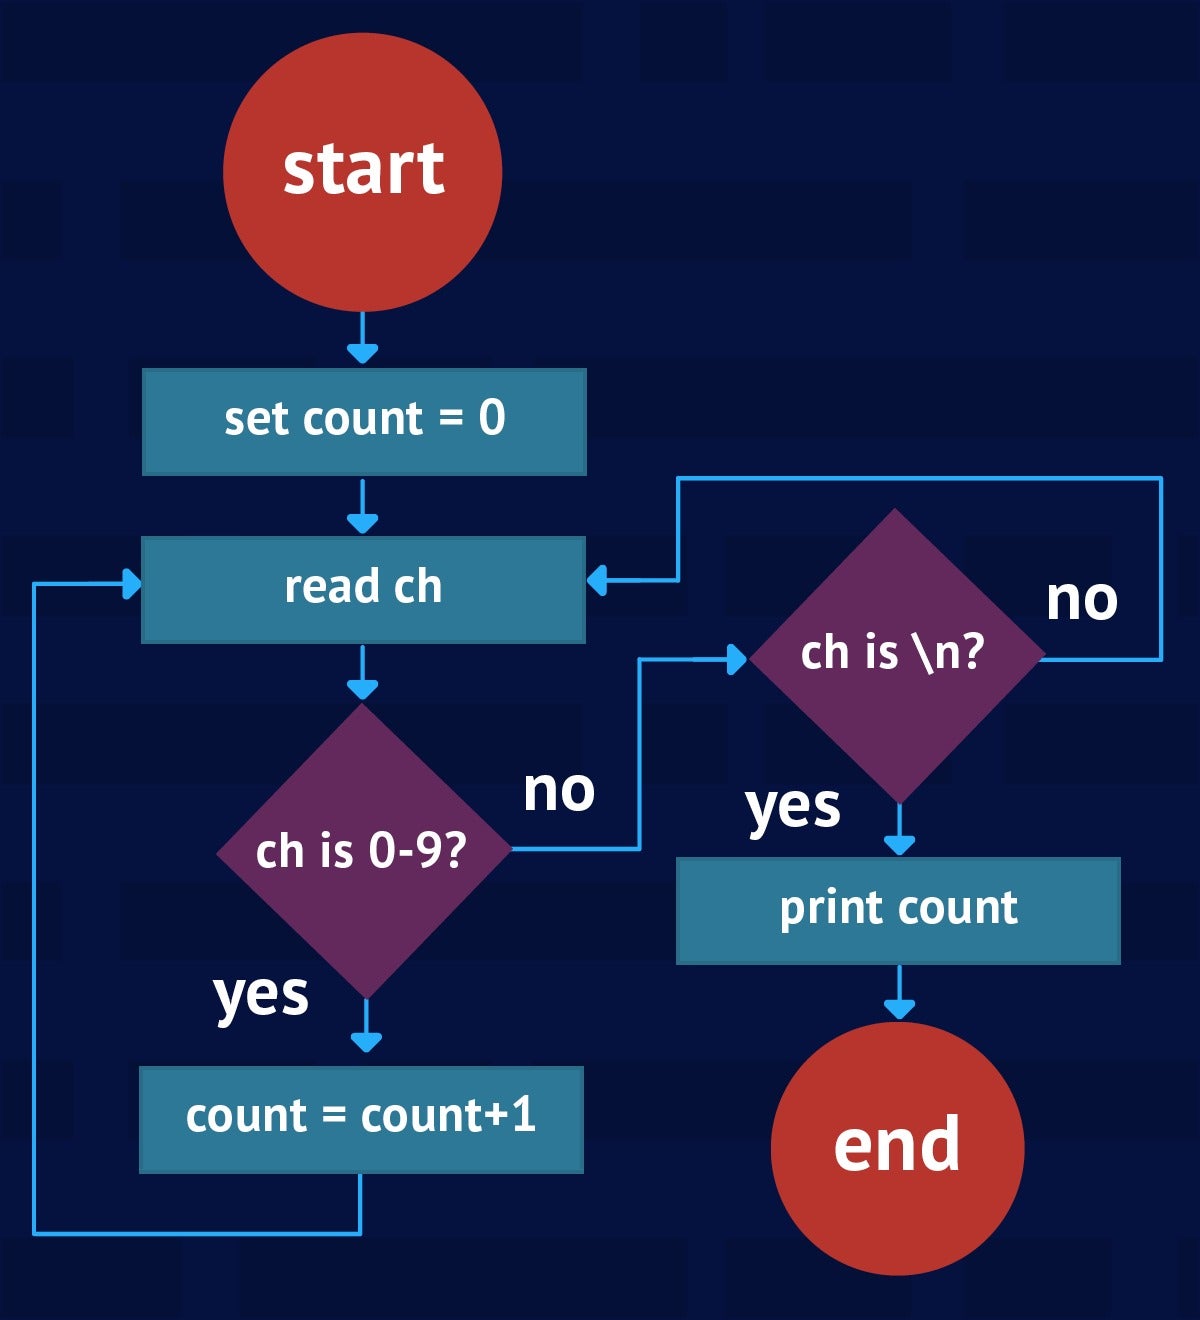 fig 1 - example of an algorithm in a flowchart